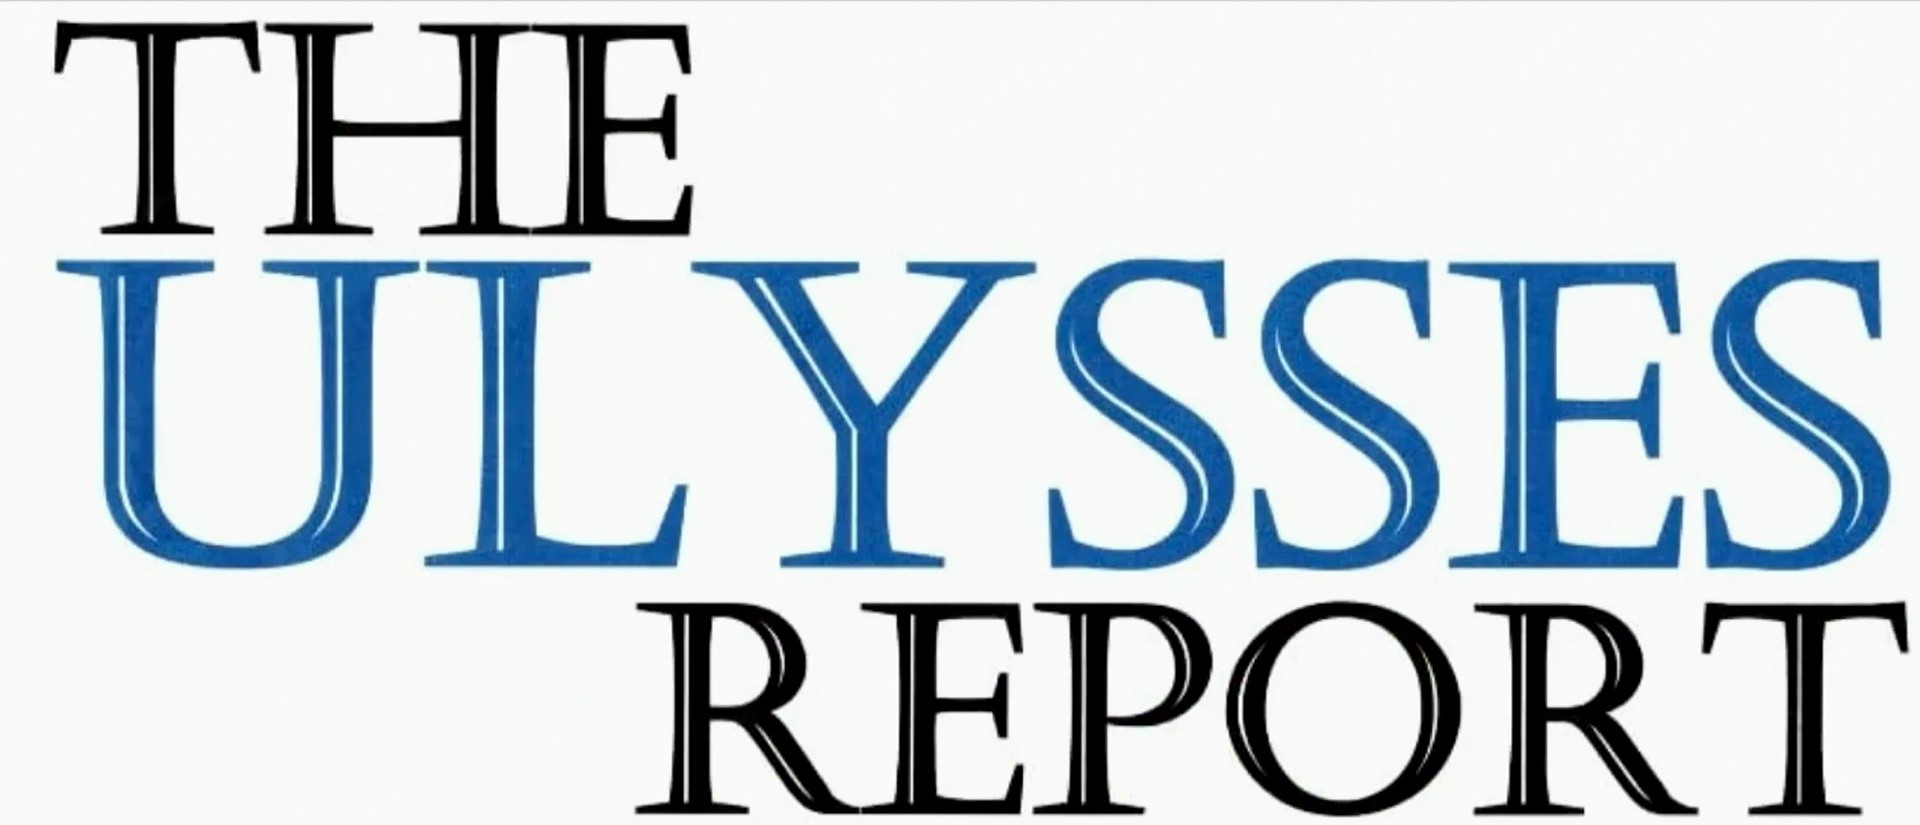 THE ULYSSES REPORT